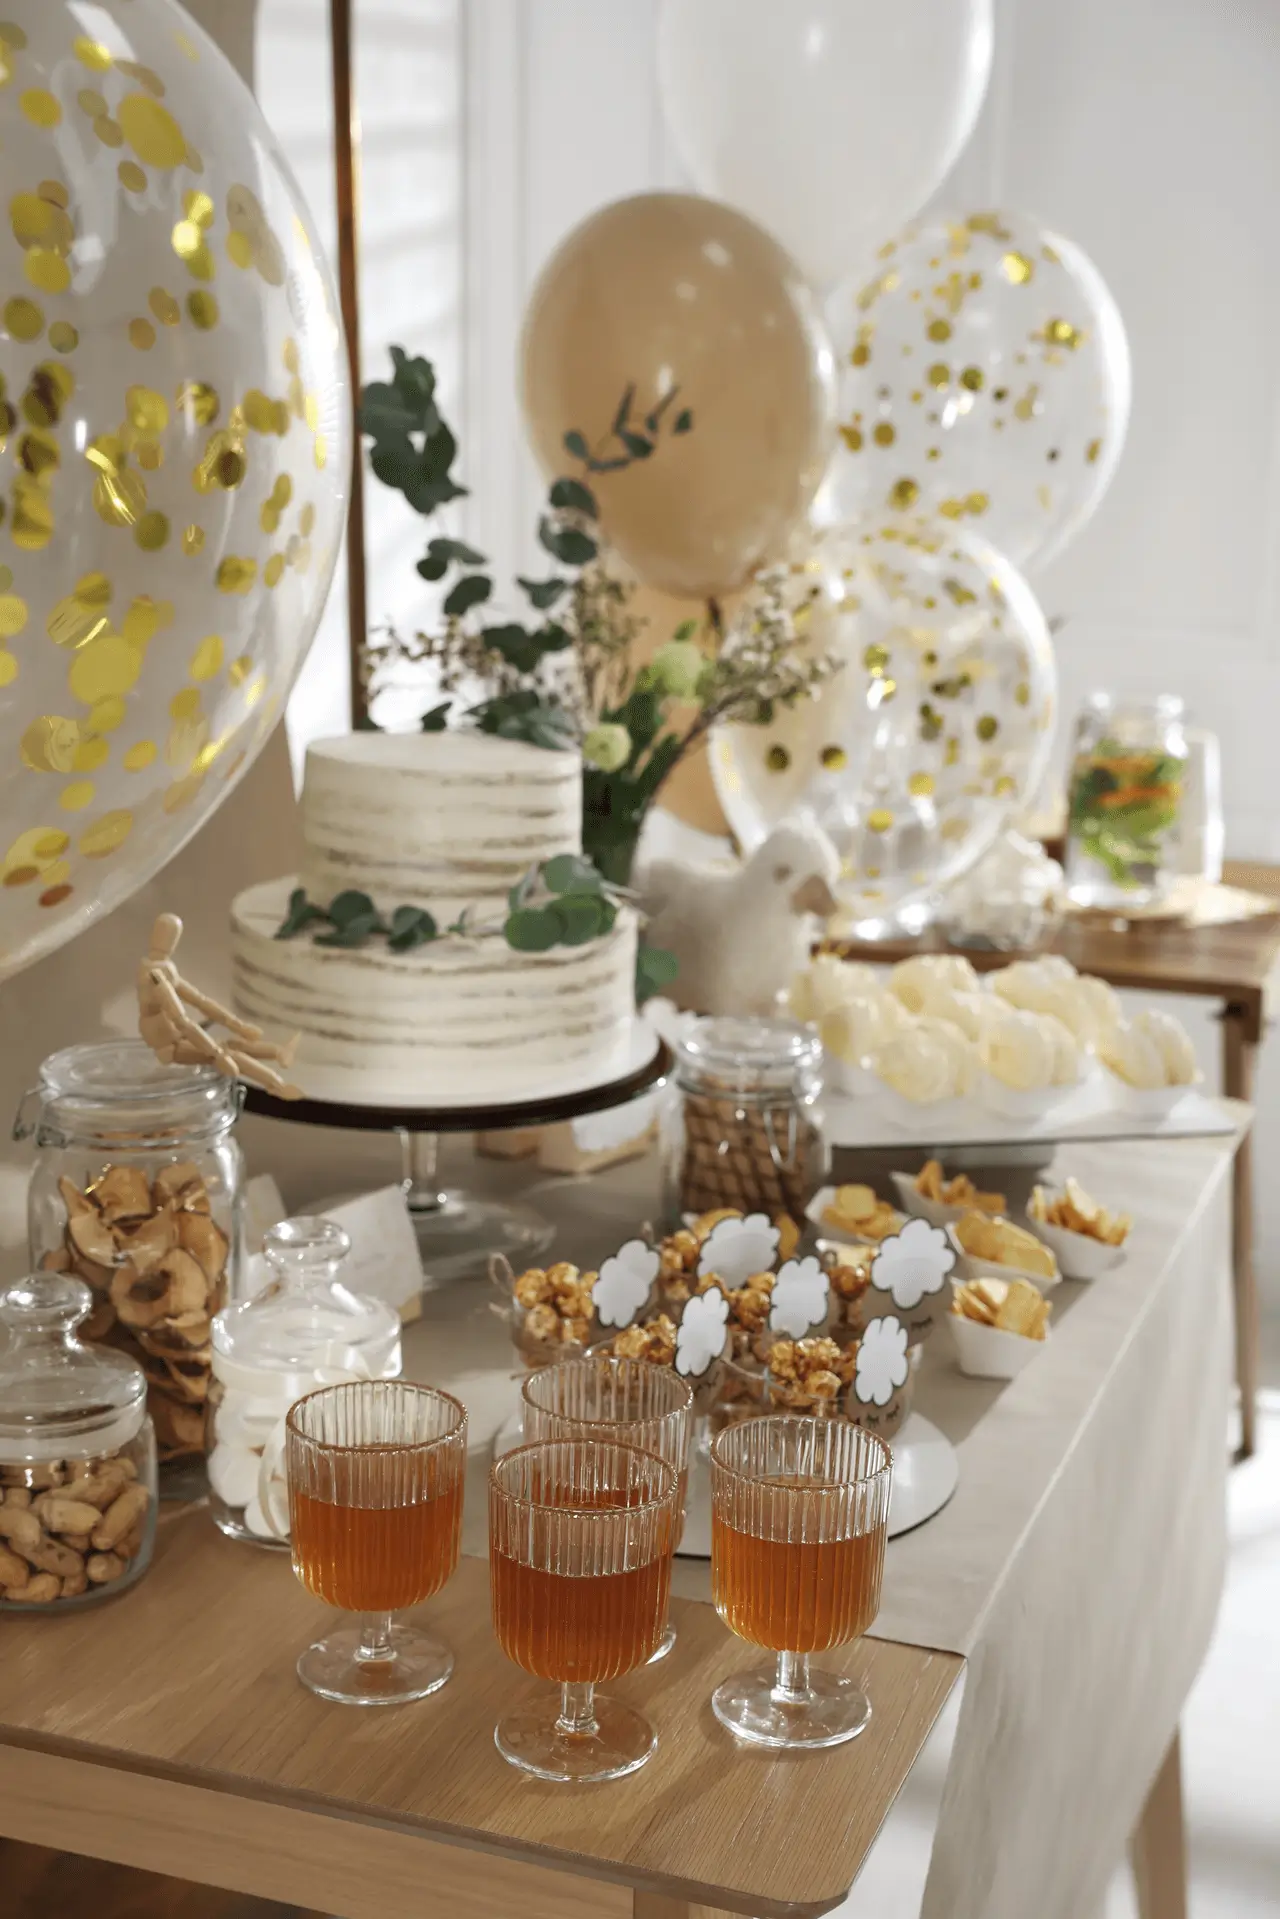 Catering for Baby Shower In Dubai